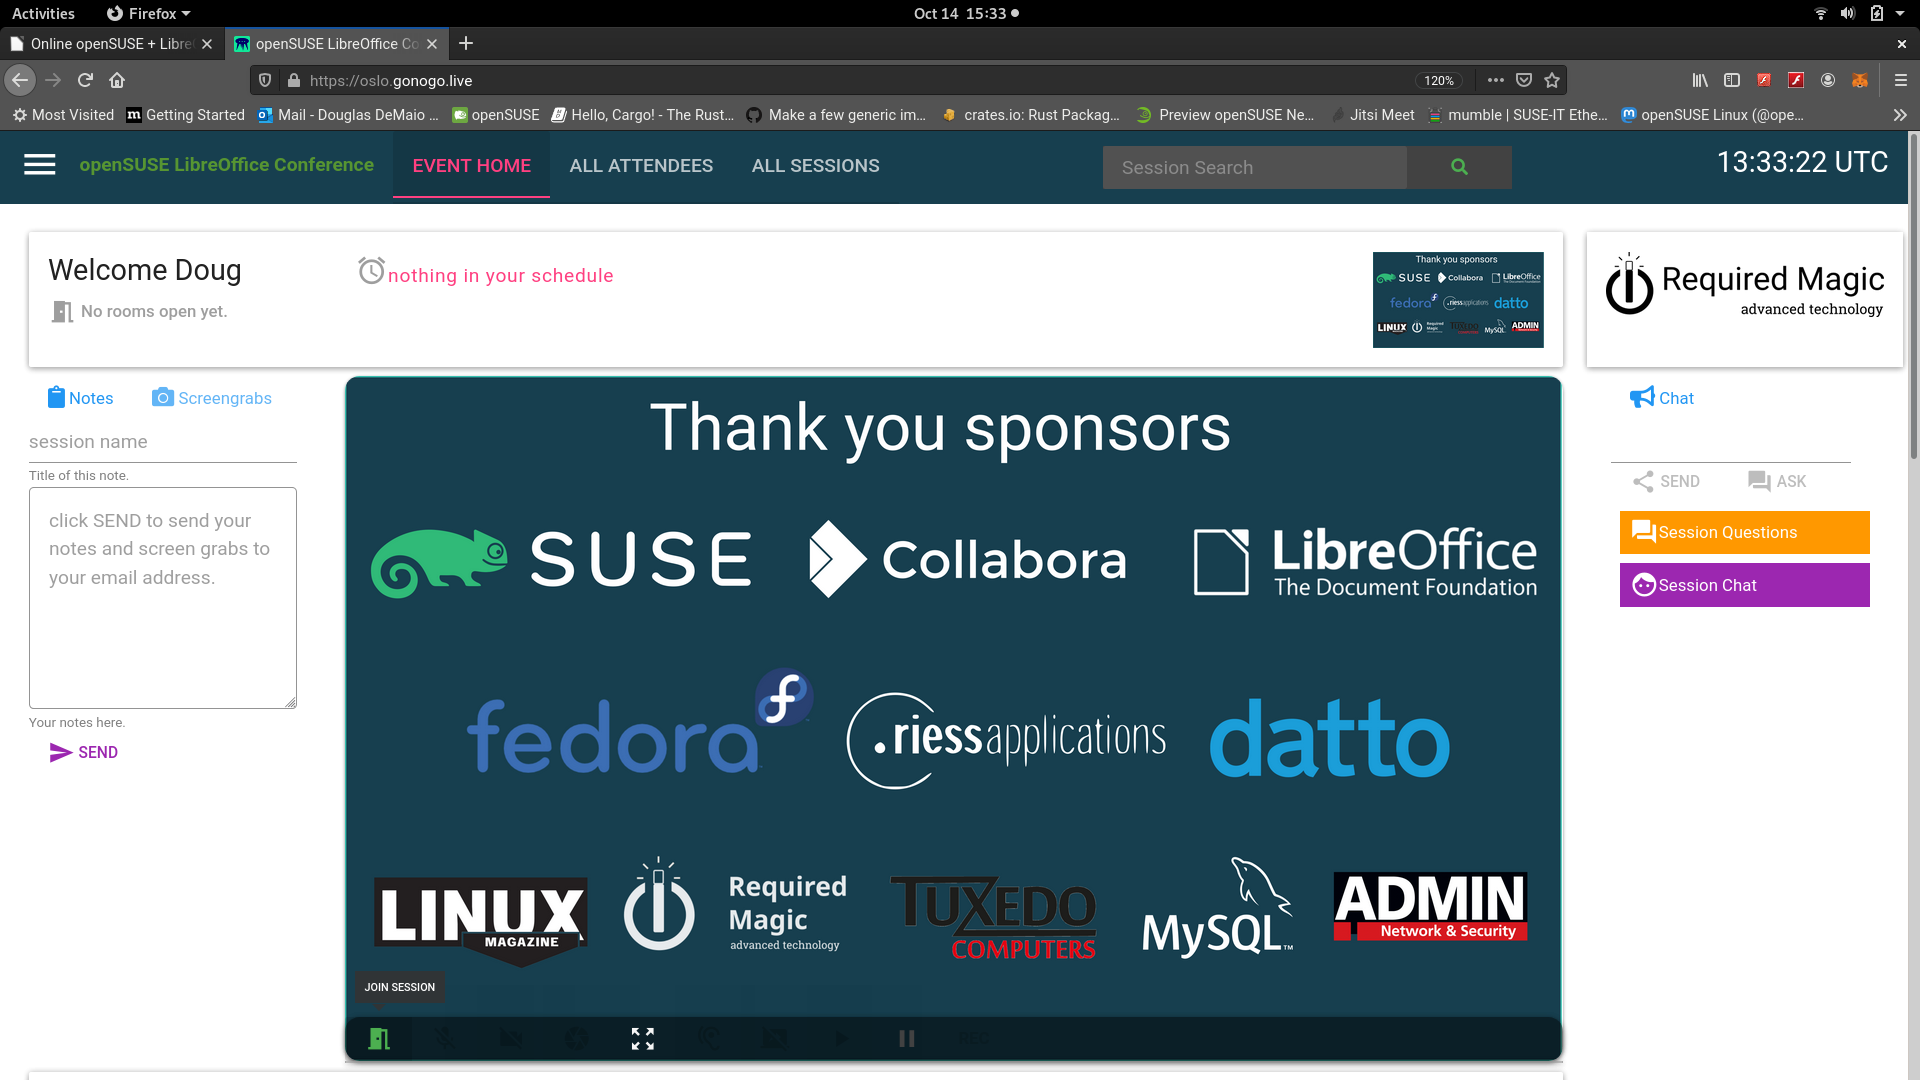 Find out more about the openSUSE + LibreOffice Conference